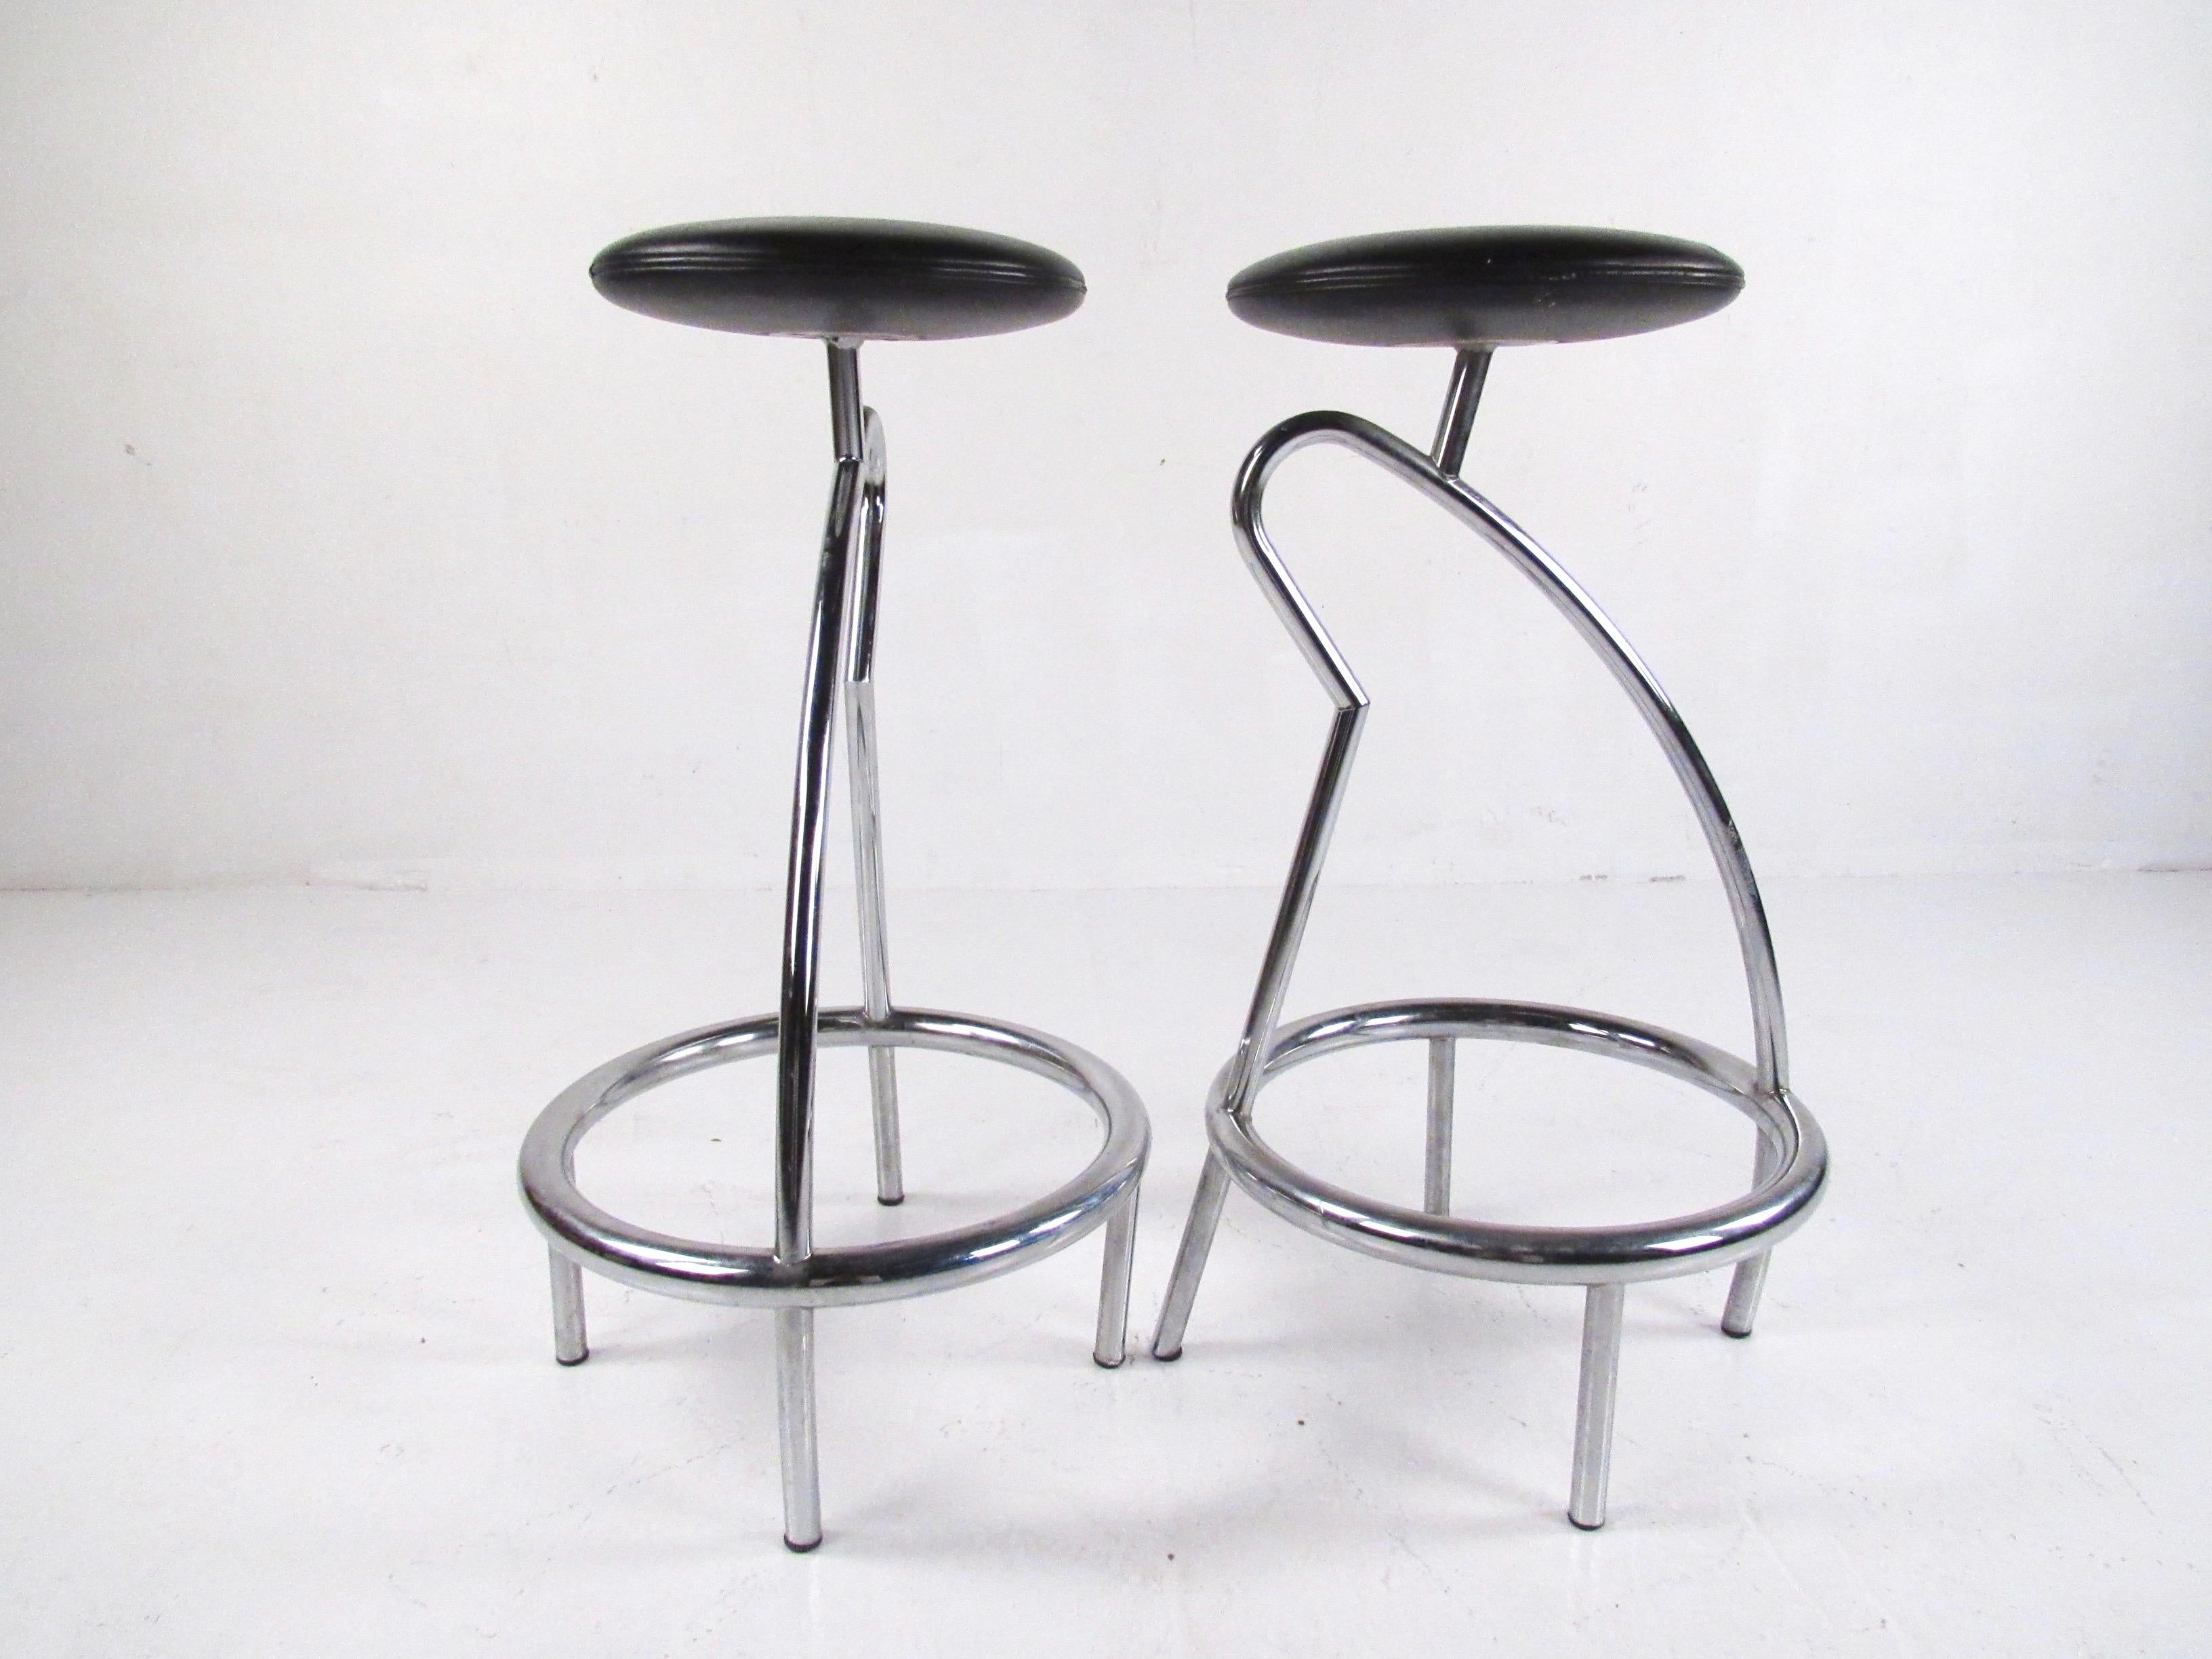 This shapely pair of modern chrome bar stools feature bent metal bases with comfortably padded leather seats. The unique design of the bent metal bases add simple yet impressive Italian modern feel to bar or tall counter seating. Seat height is 31